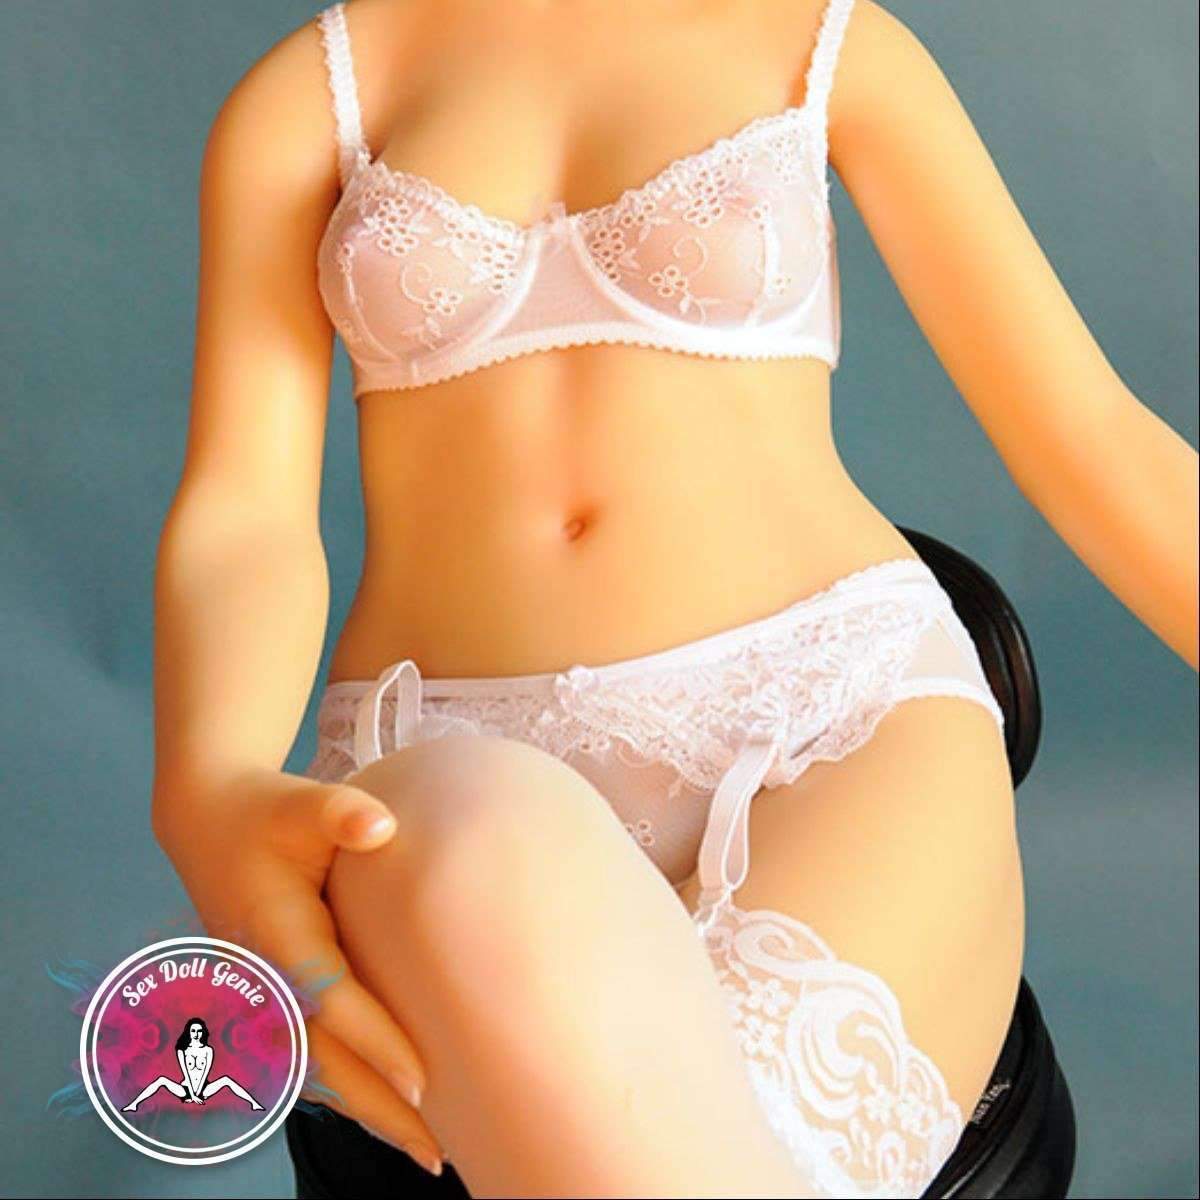 DS Doll - 158cm - Mandy Head - Type 1 D Cup Silicone Doll-11